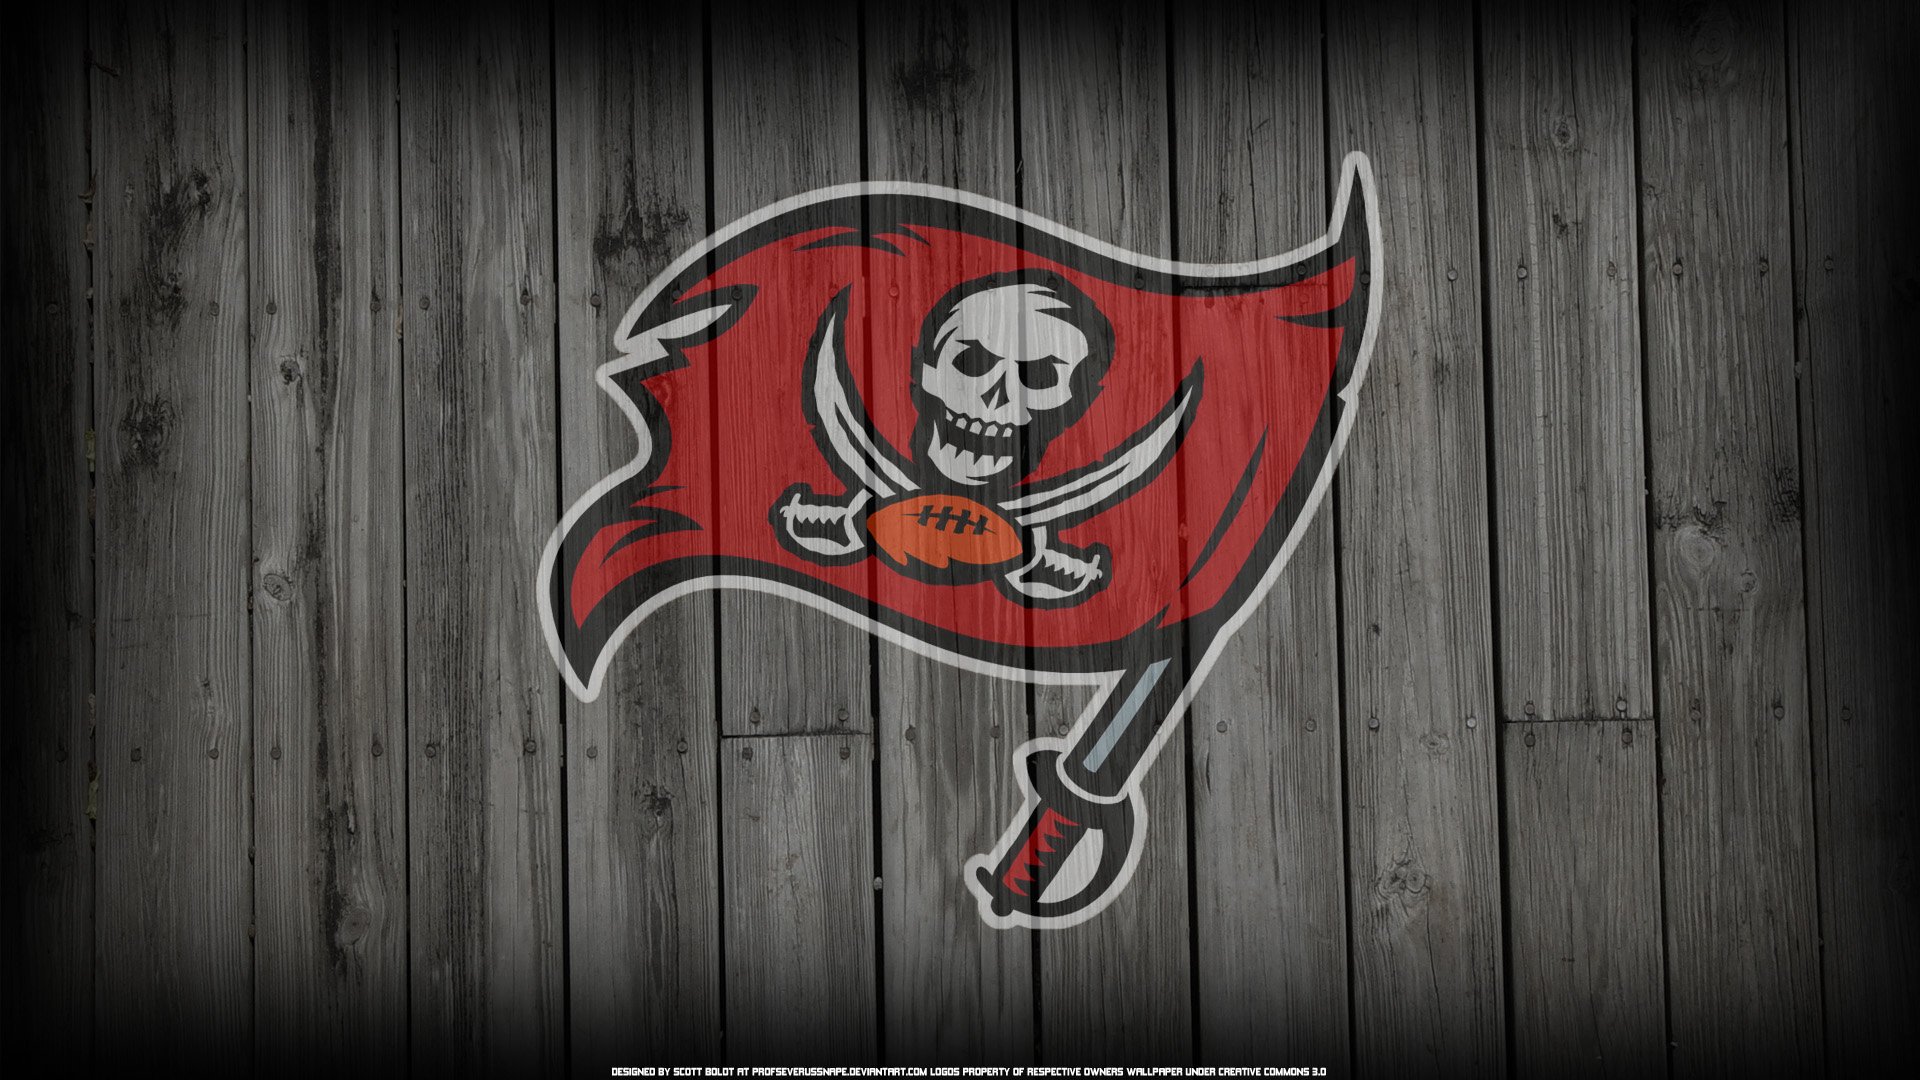 Tampa Bay Logo on Wood by ProfSeverusSnape 1920 x 1080